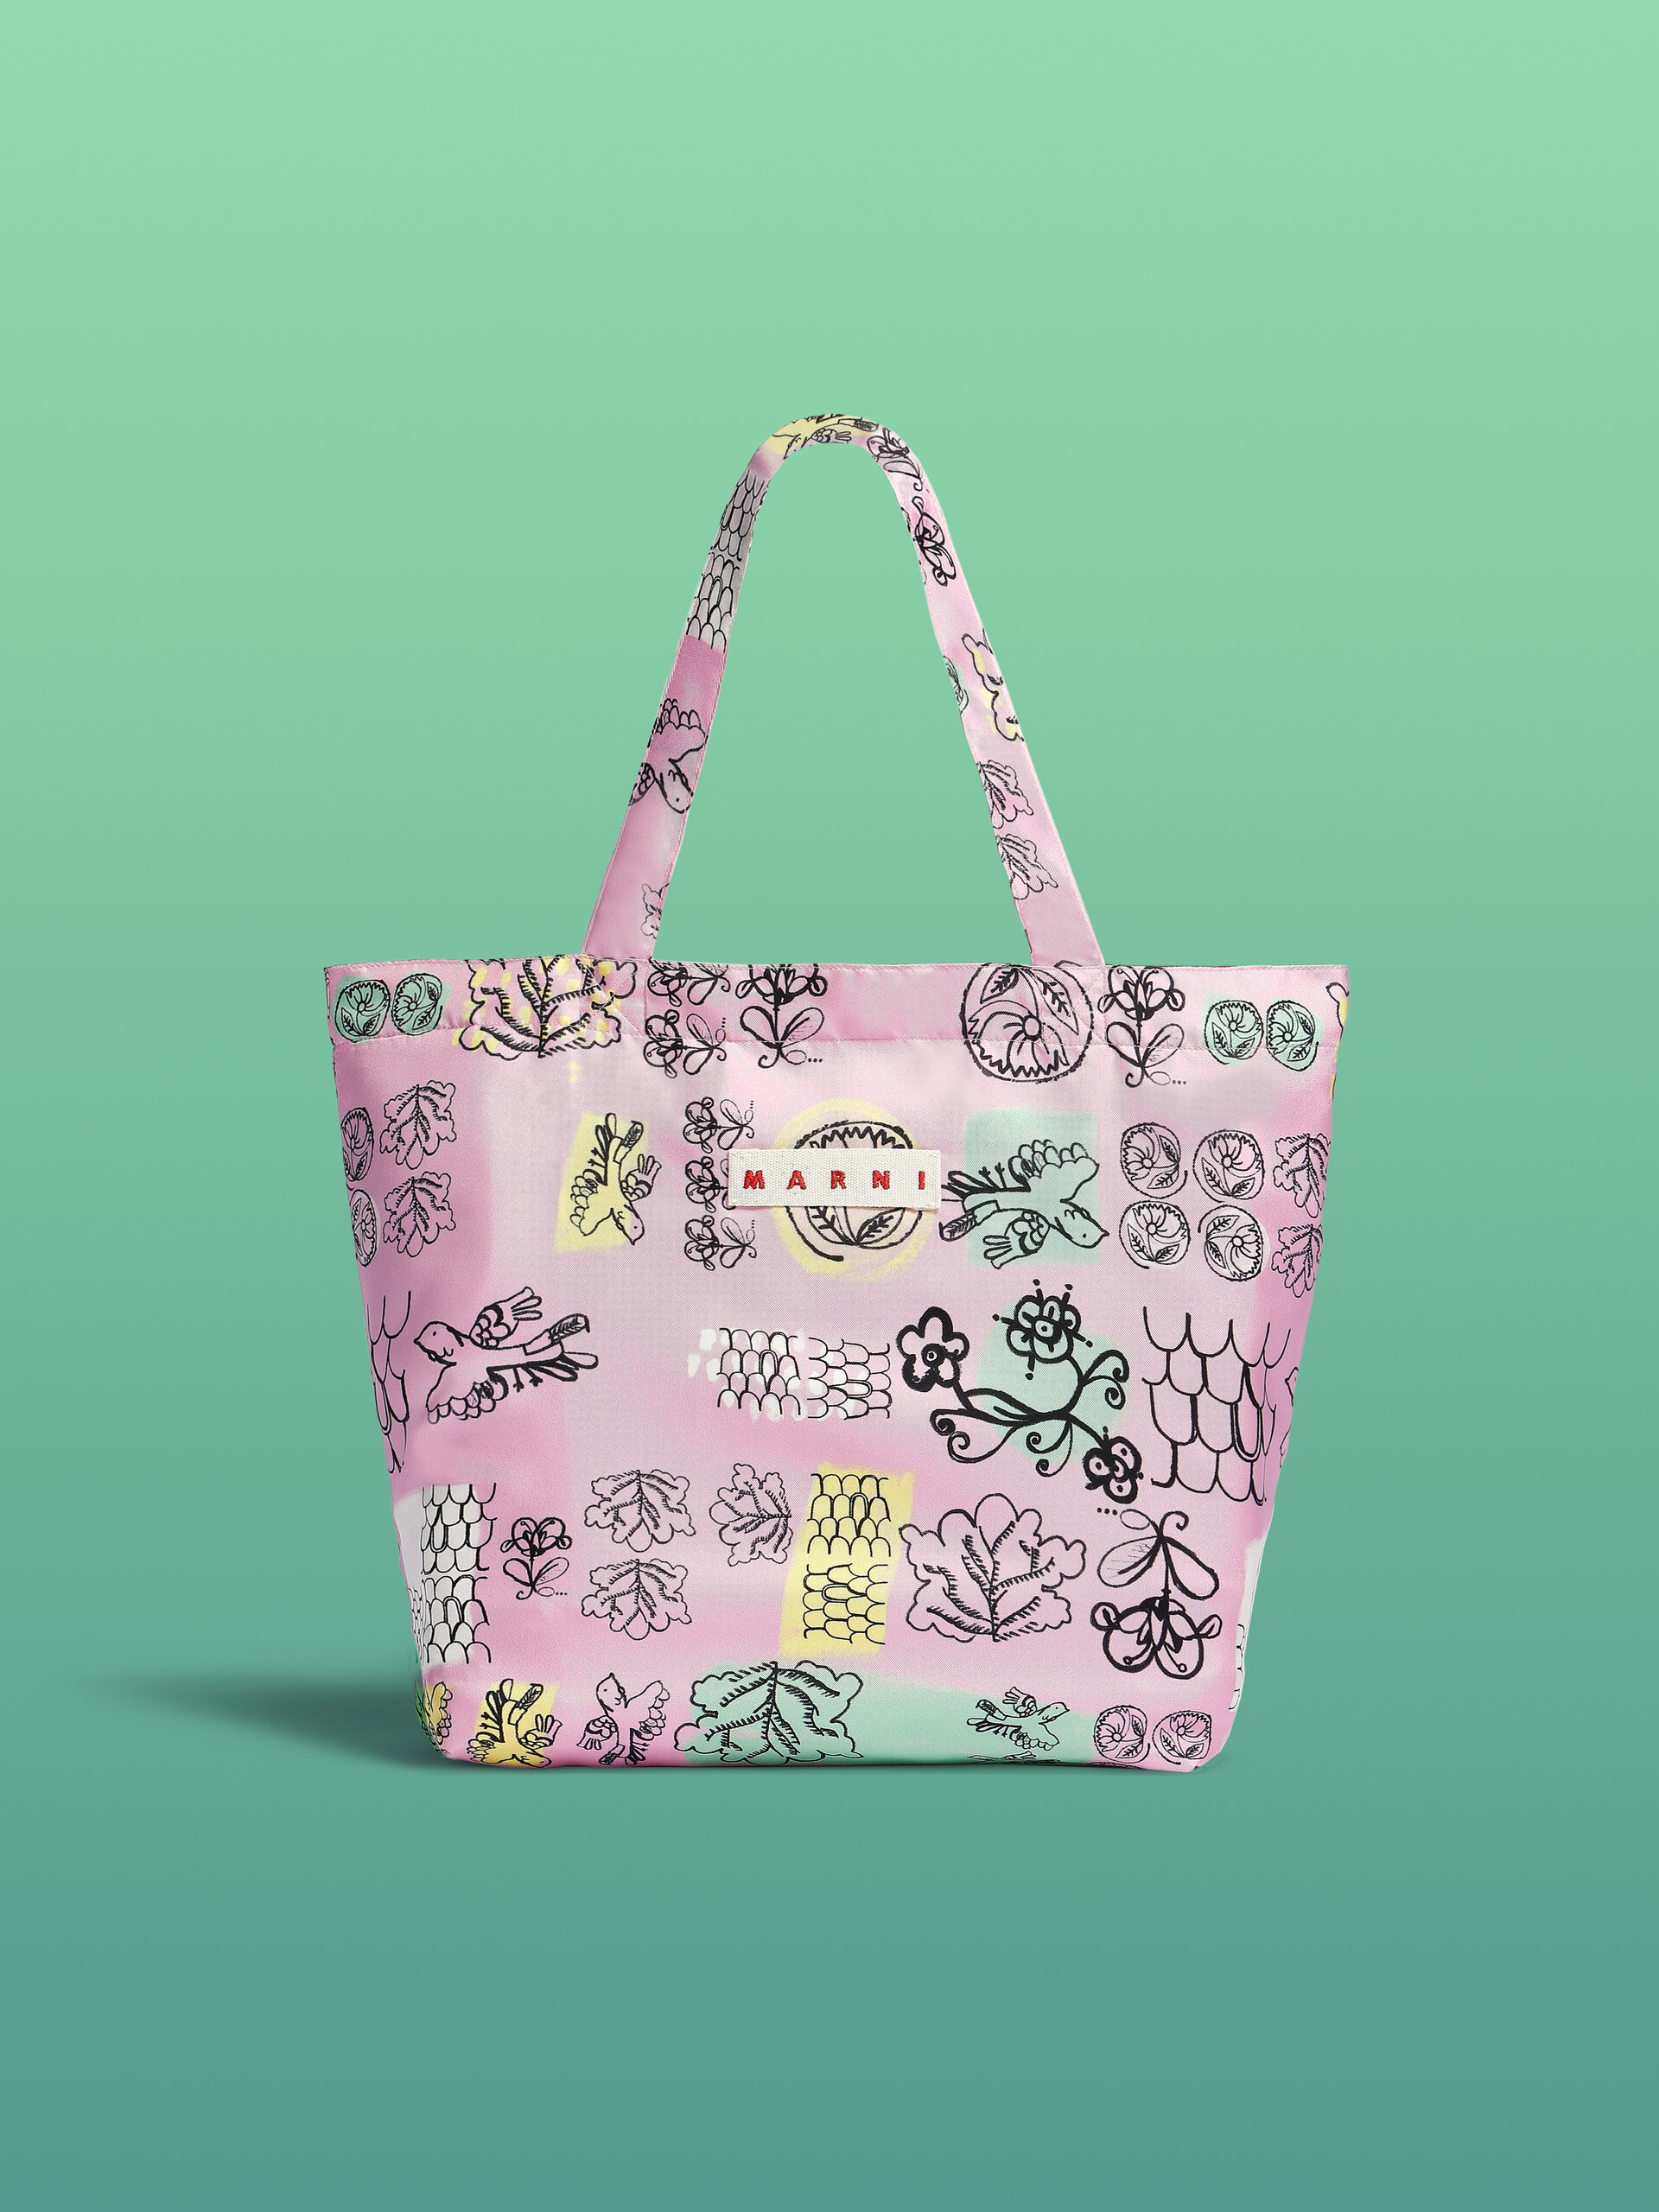 Pink and blue silk tote bag with archival graphic print - Bags - Image 1